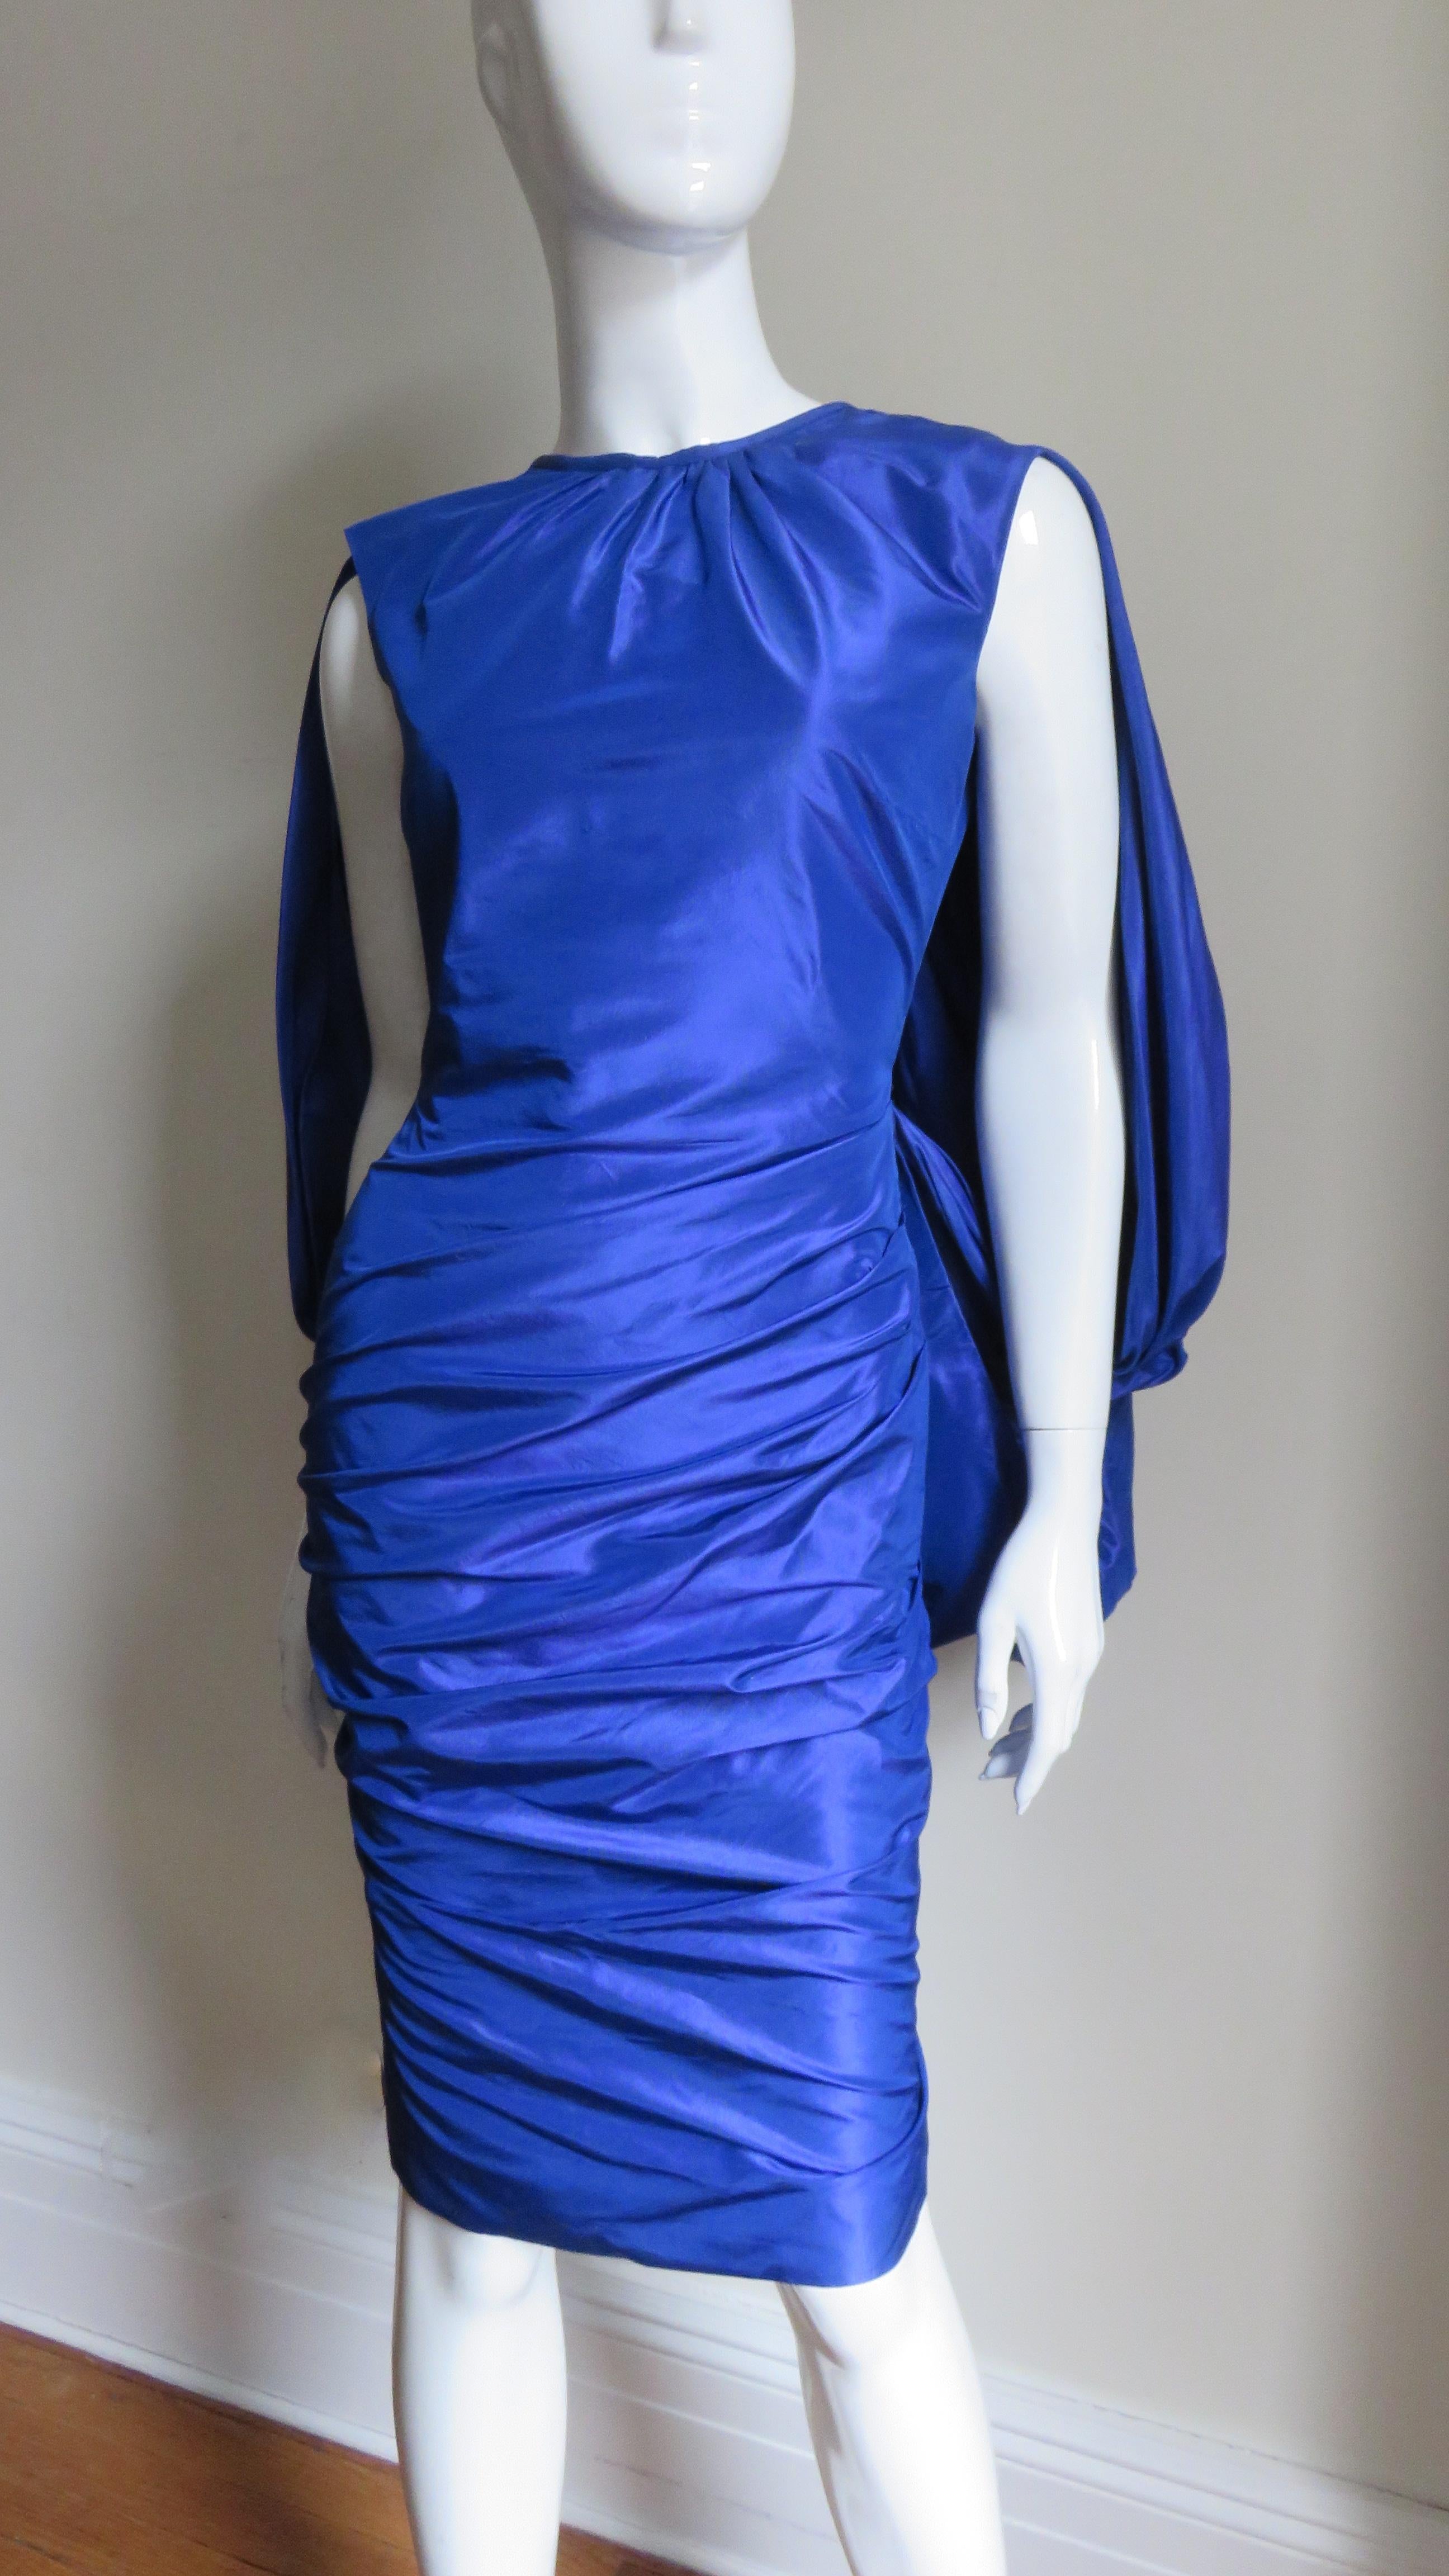 This is a gorgeous cobalt blue silk dress by Tom Ford. It is sleeveless, semi fitted with a horizontally ruched skirt. The back is scooped with a fabulous hip length gathered drape emanating from it creating a cape effect. The dress is fully lined